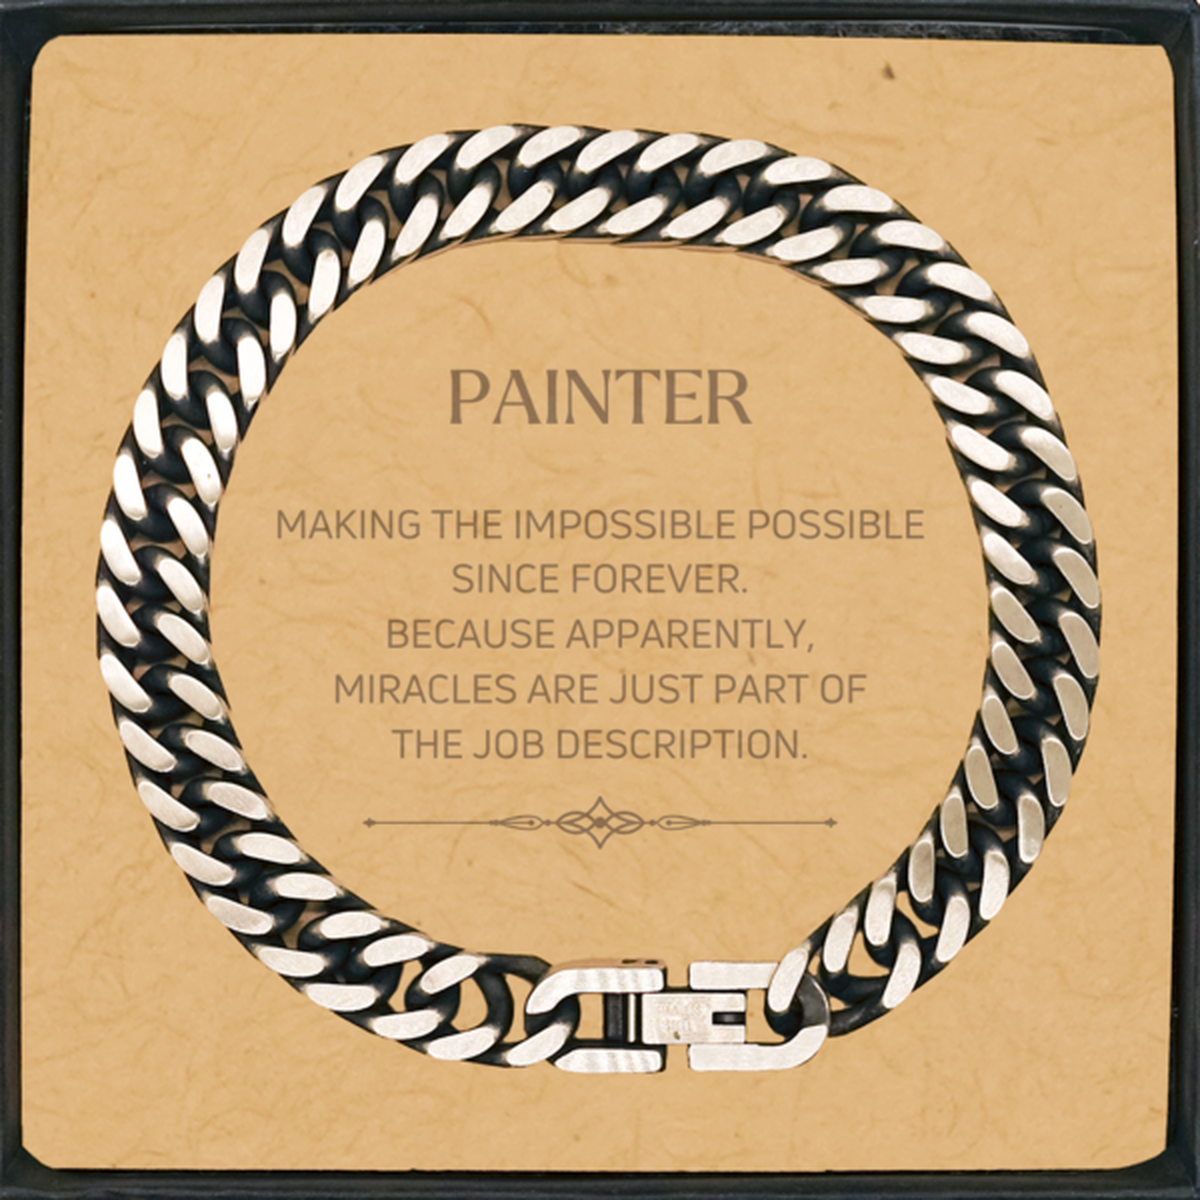 Funny Painter Gifts, Miracles are just part of the job description, Inspirational Birthday Cuban Link Chain Bracelet For Painter, Men, Women, Coworkers, Friends, Boss